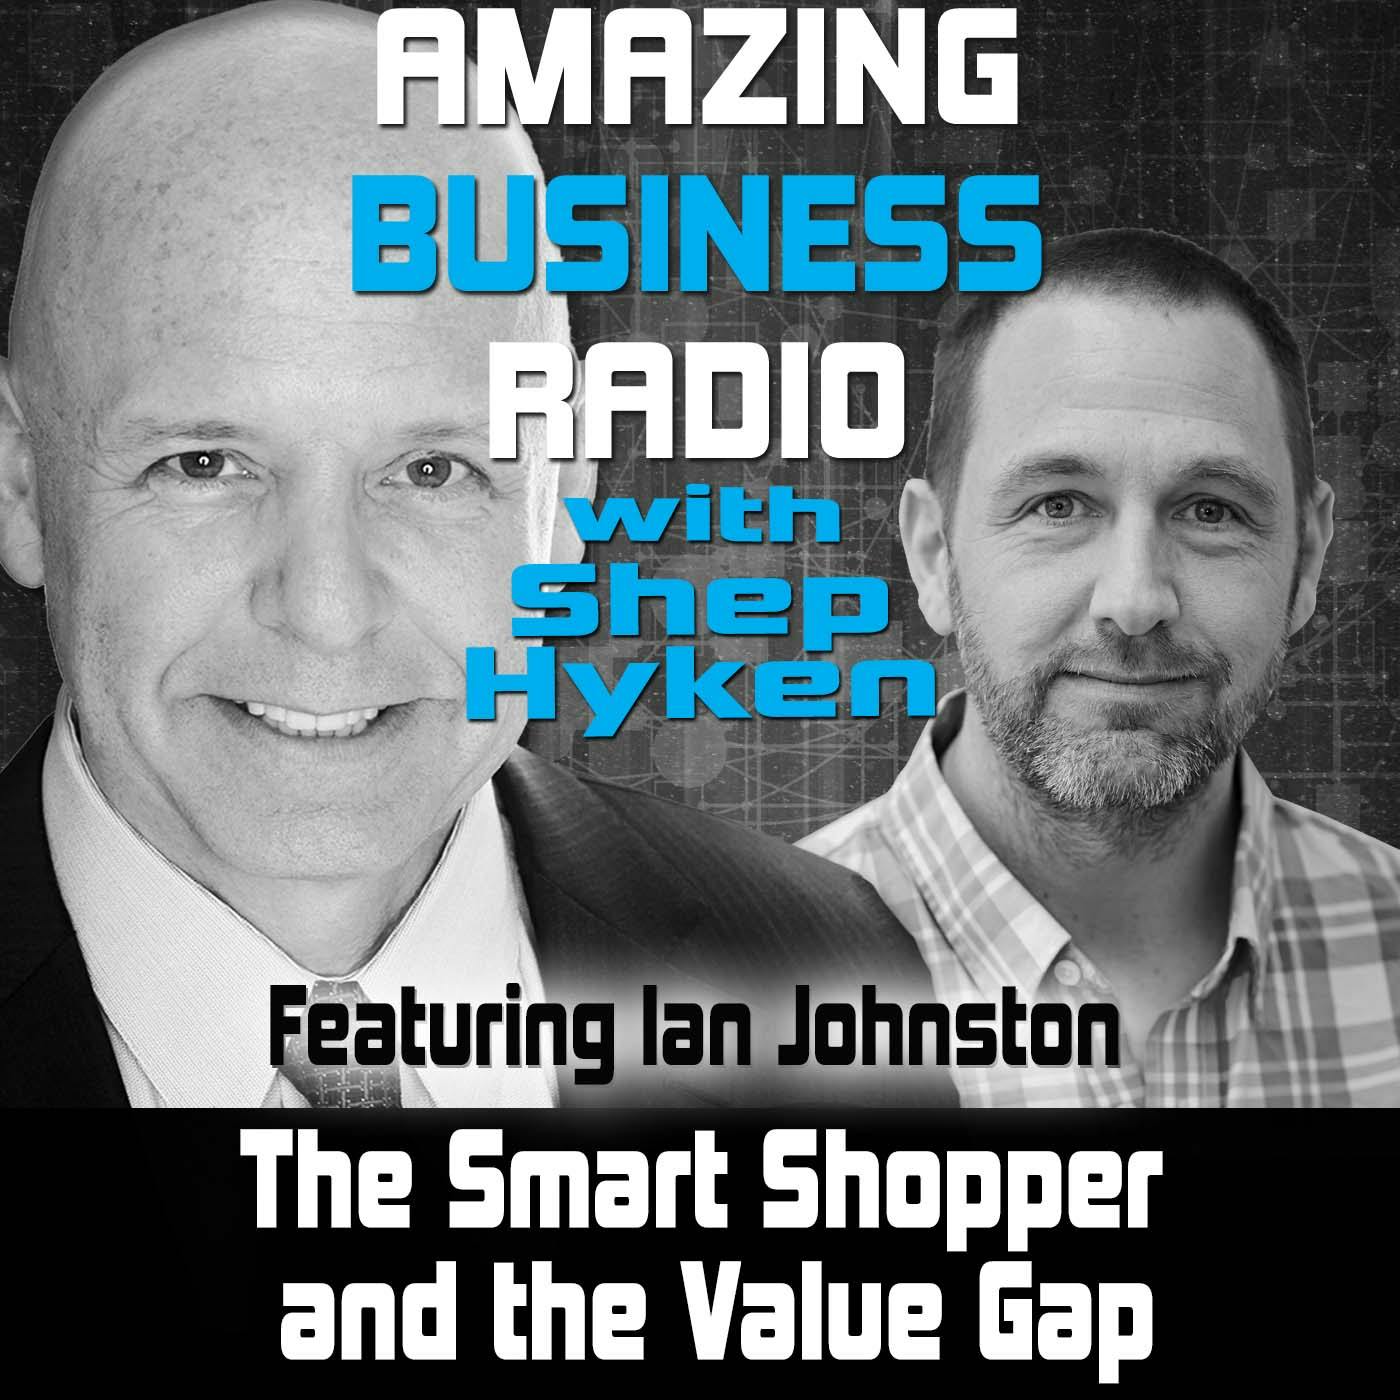 The Smart Shopper and the Value Gap Featuring Ian Johnston